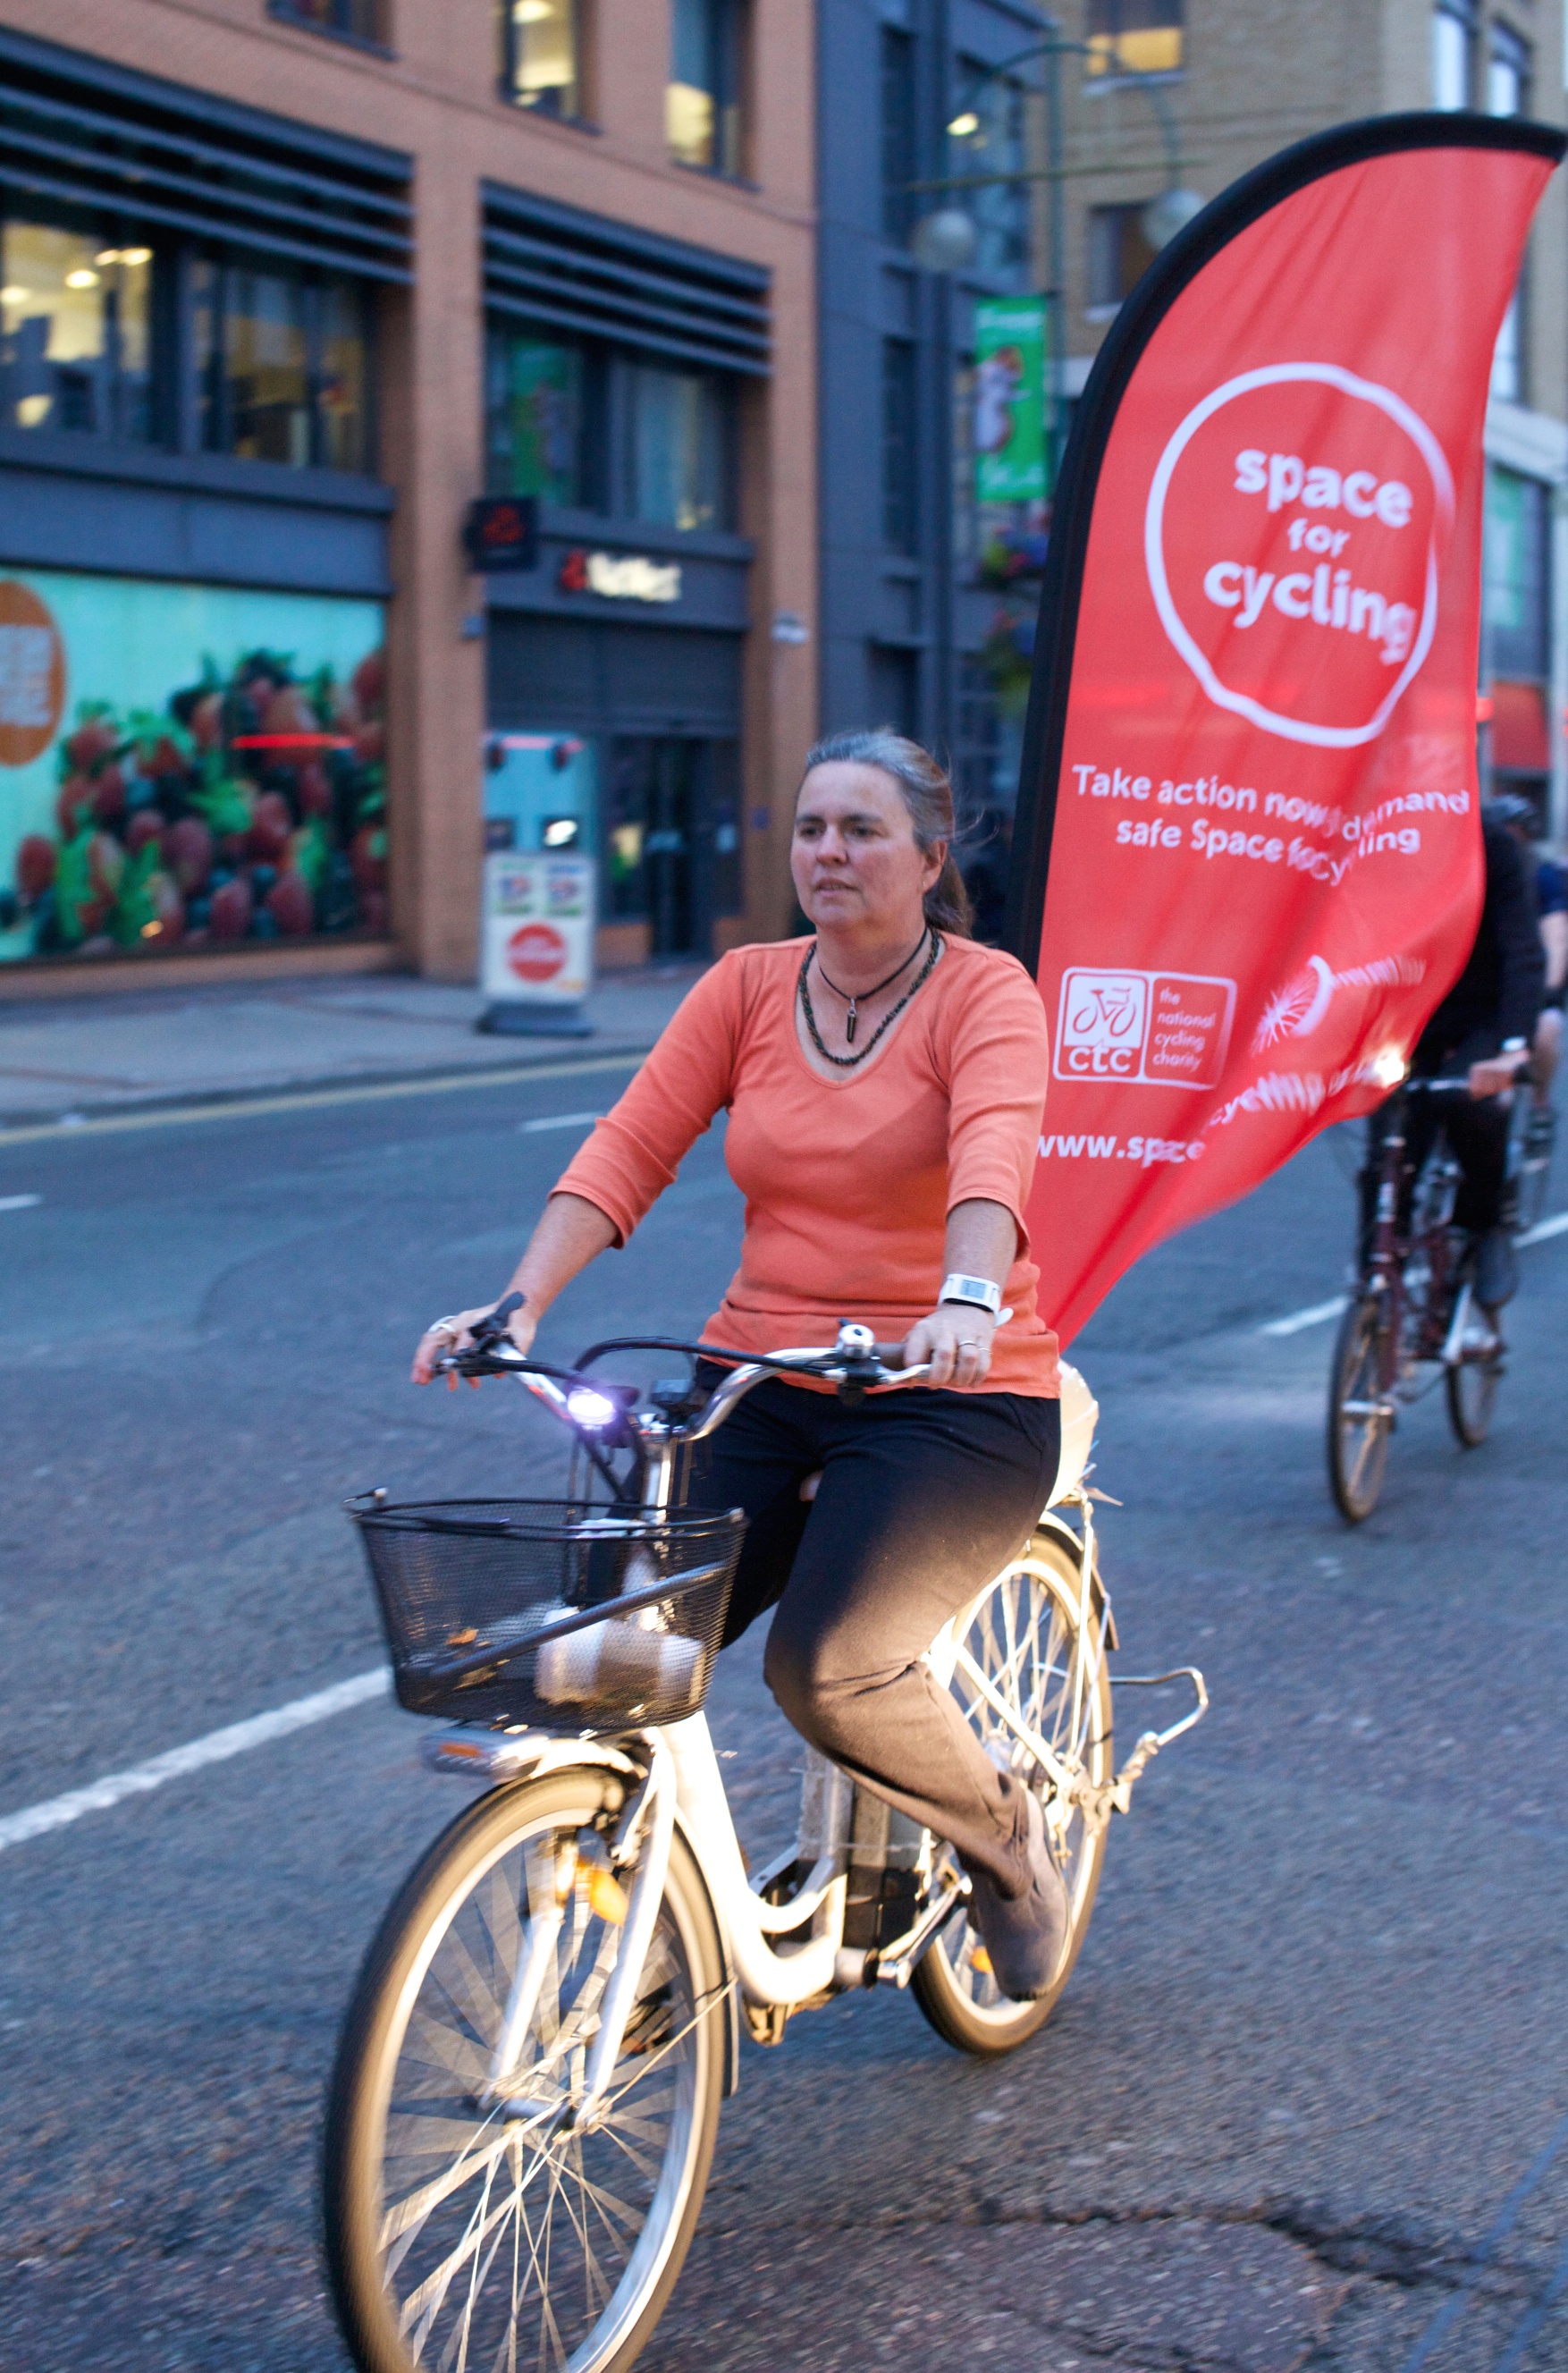 Flying the CTC's national Space for Cycling campaign